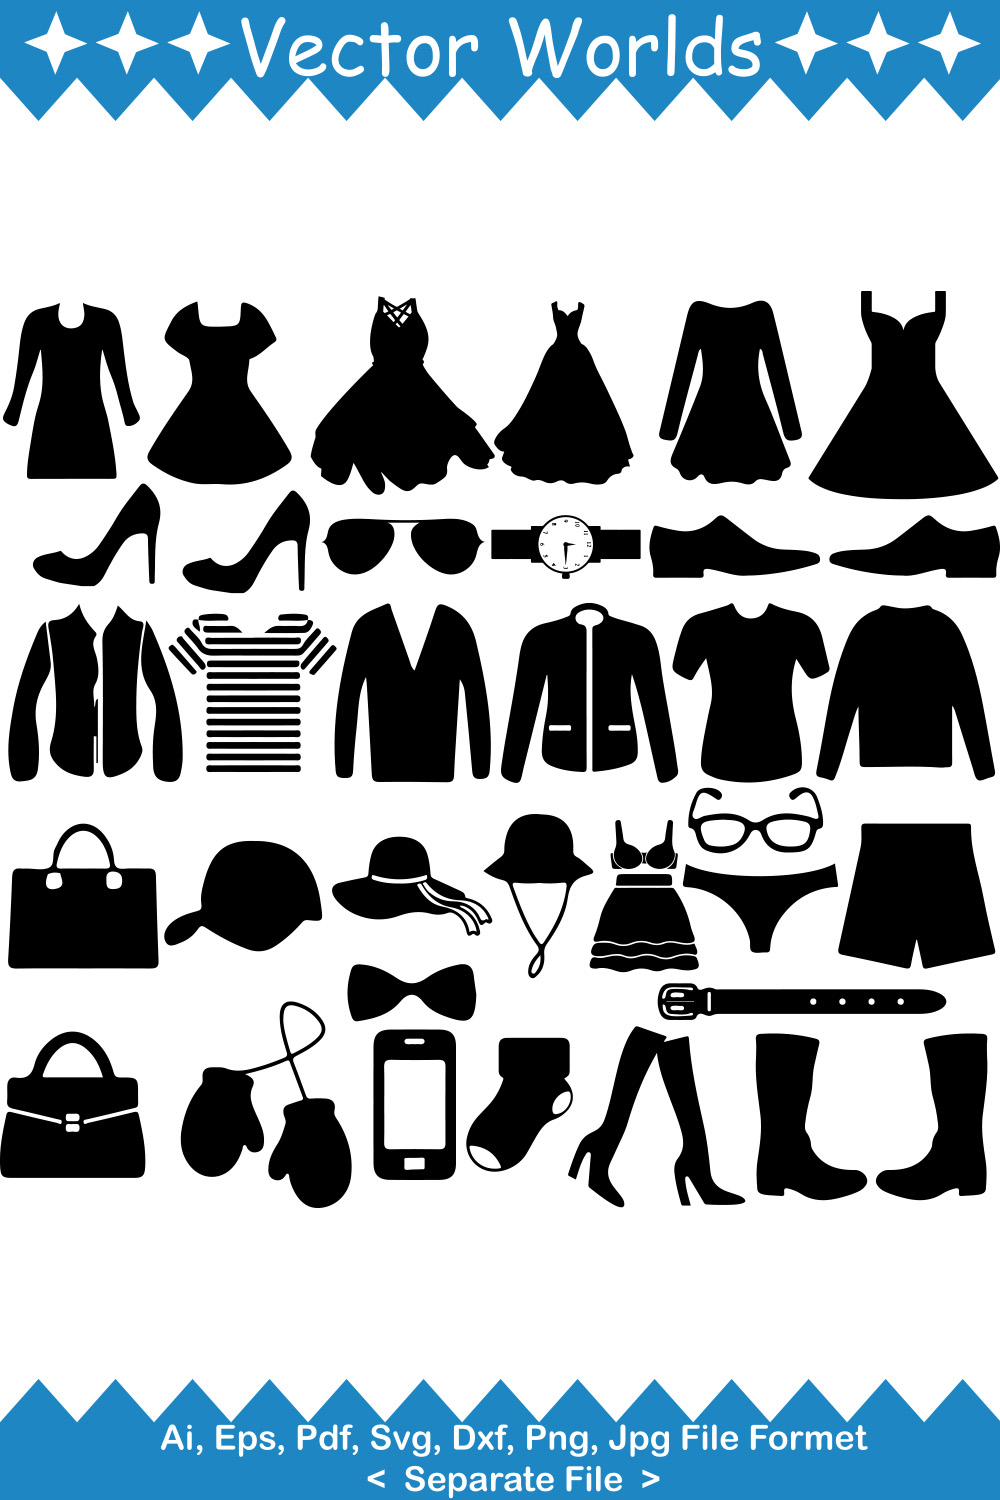 A selection of unique vector image silhouettes of clothes